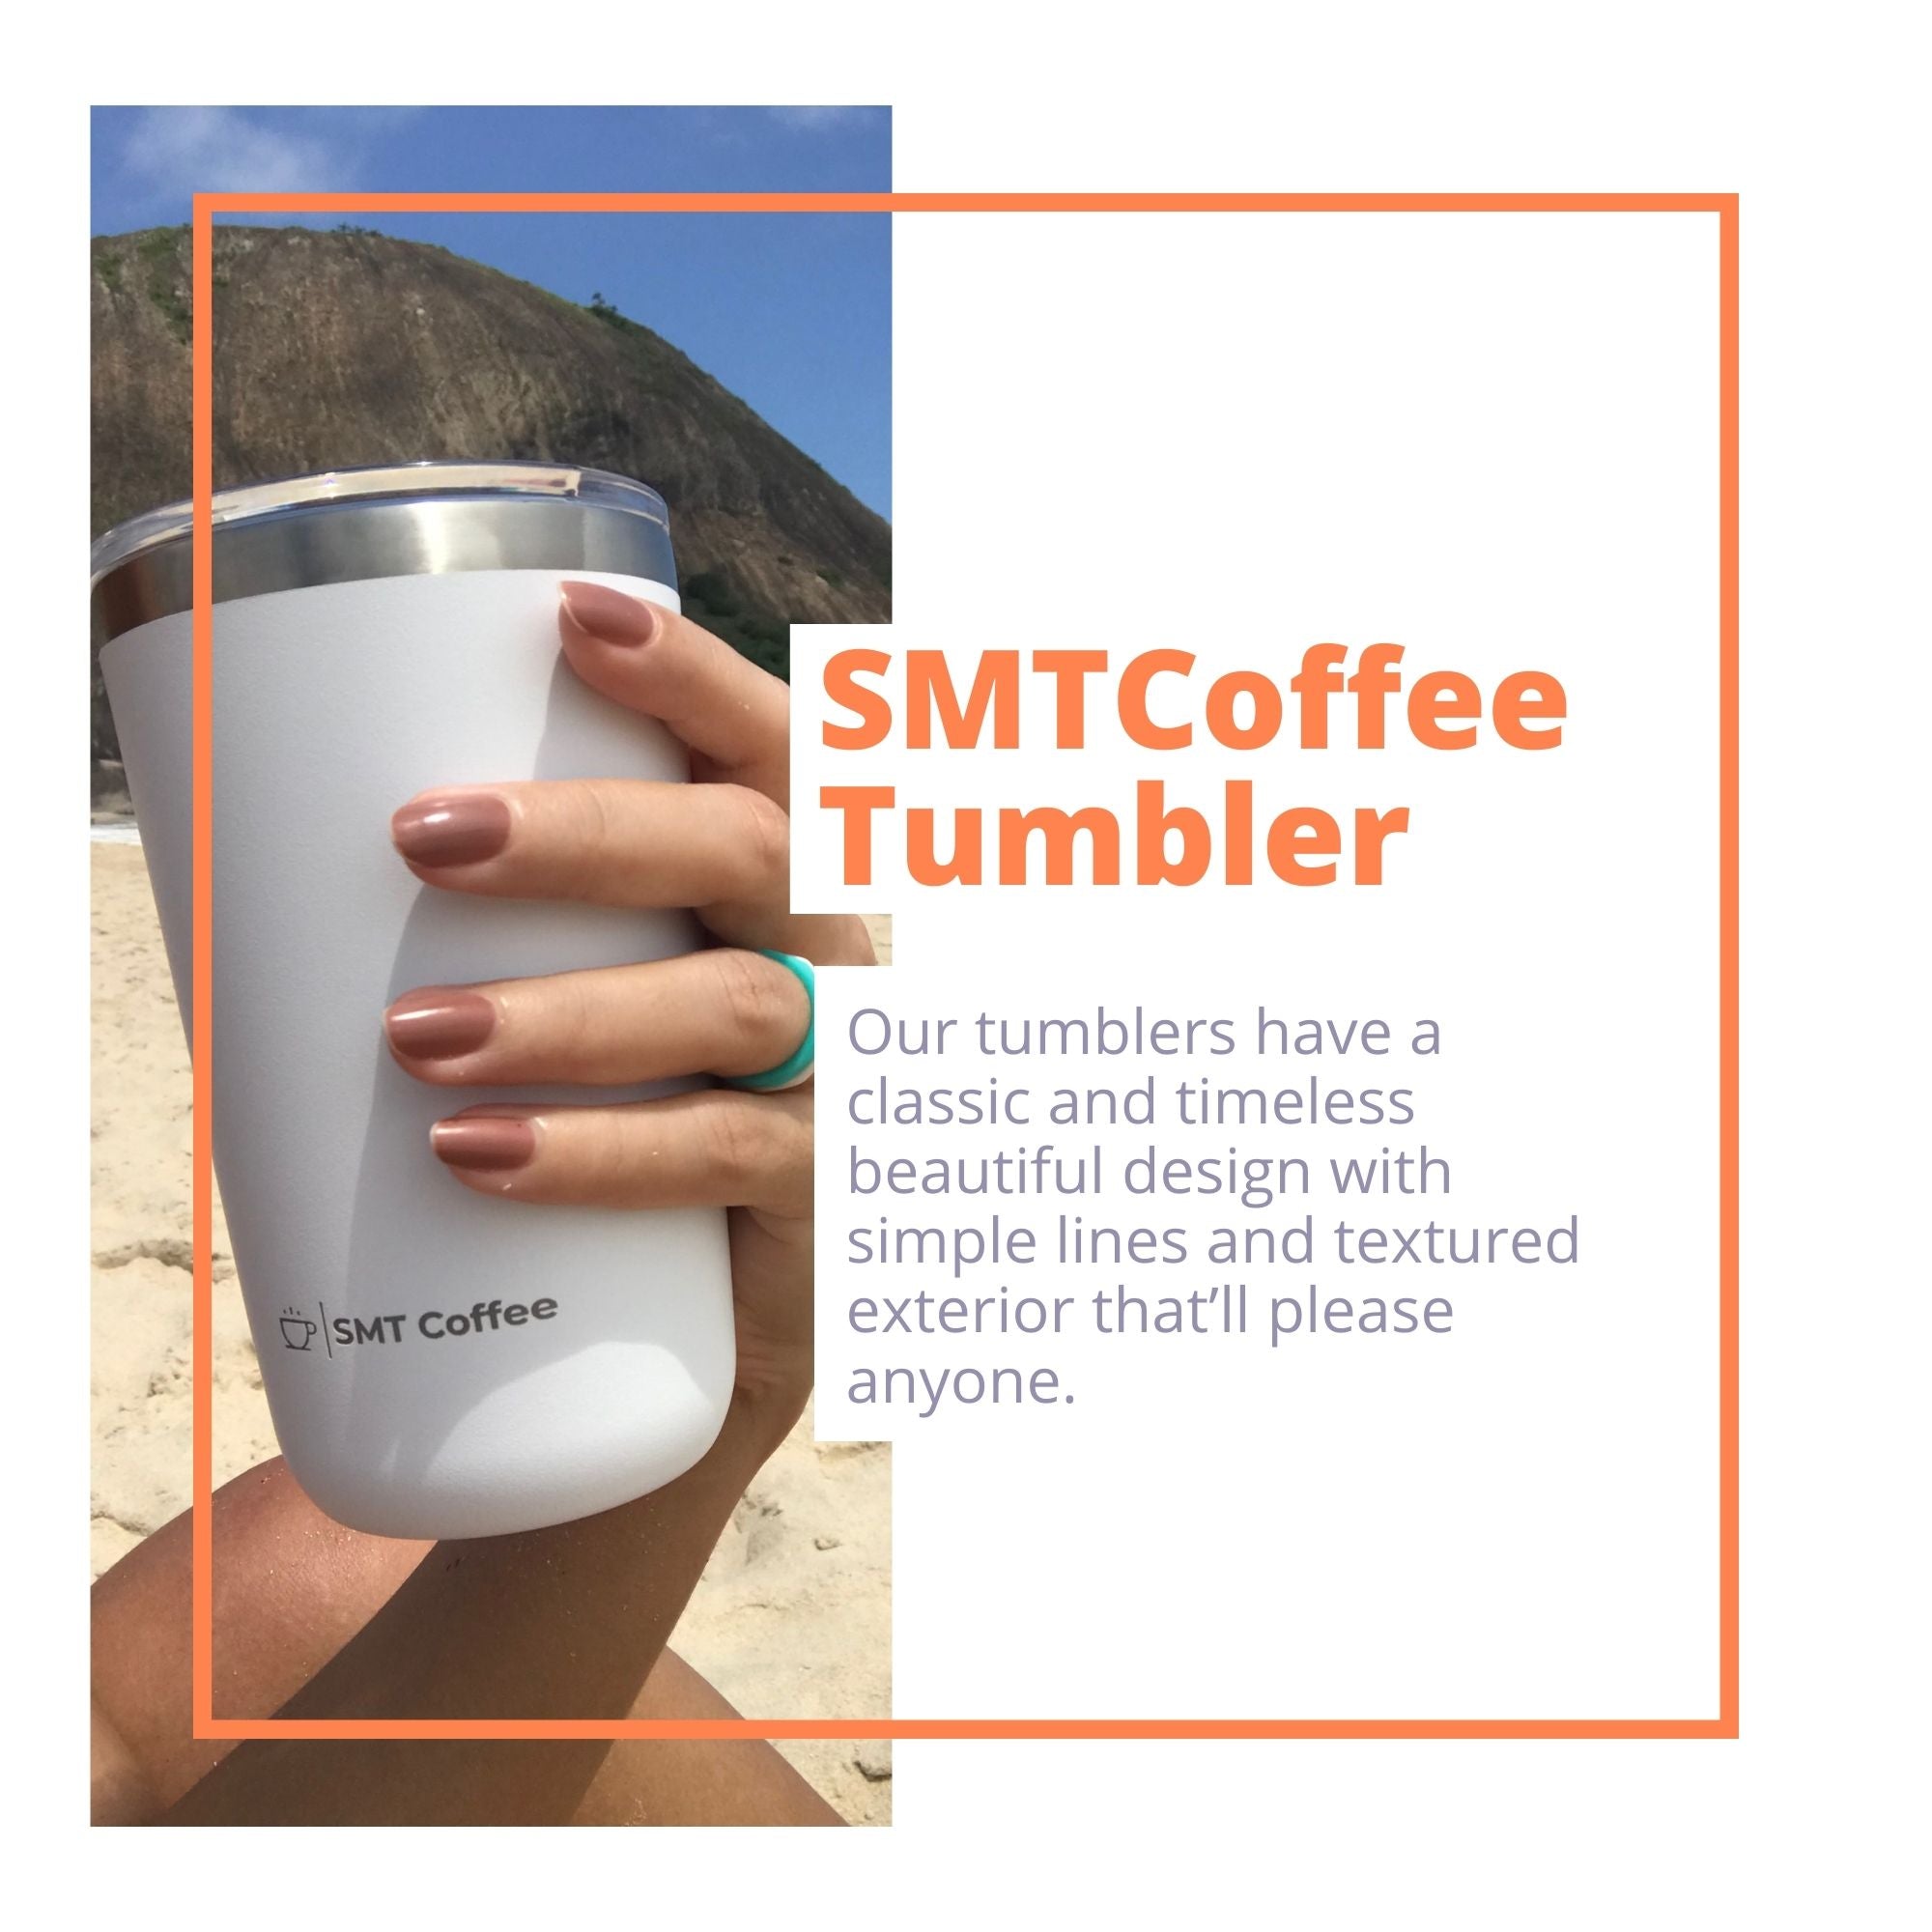 Our smtcoffee tumblers have a classic and timeless beautiful design with simple lines and textured exterior that’ll please anyone.